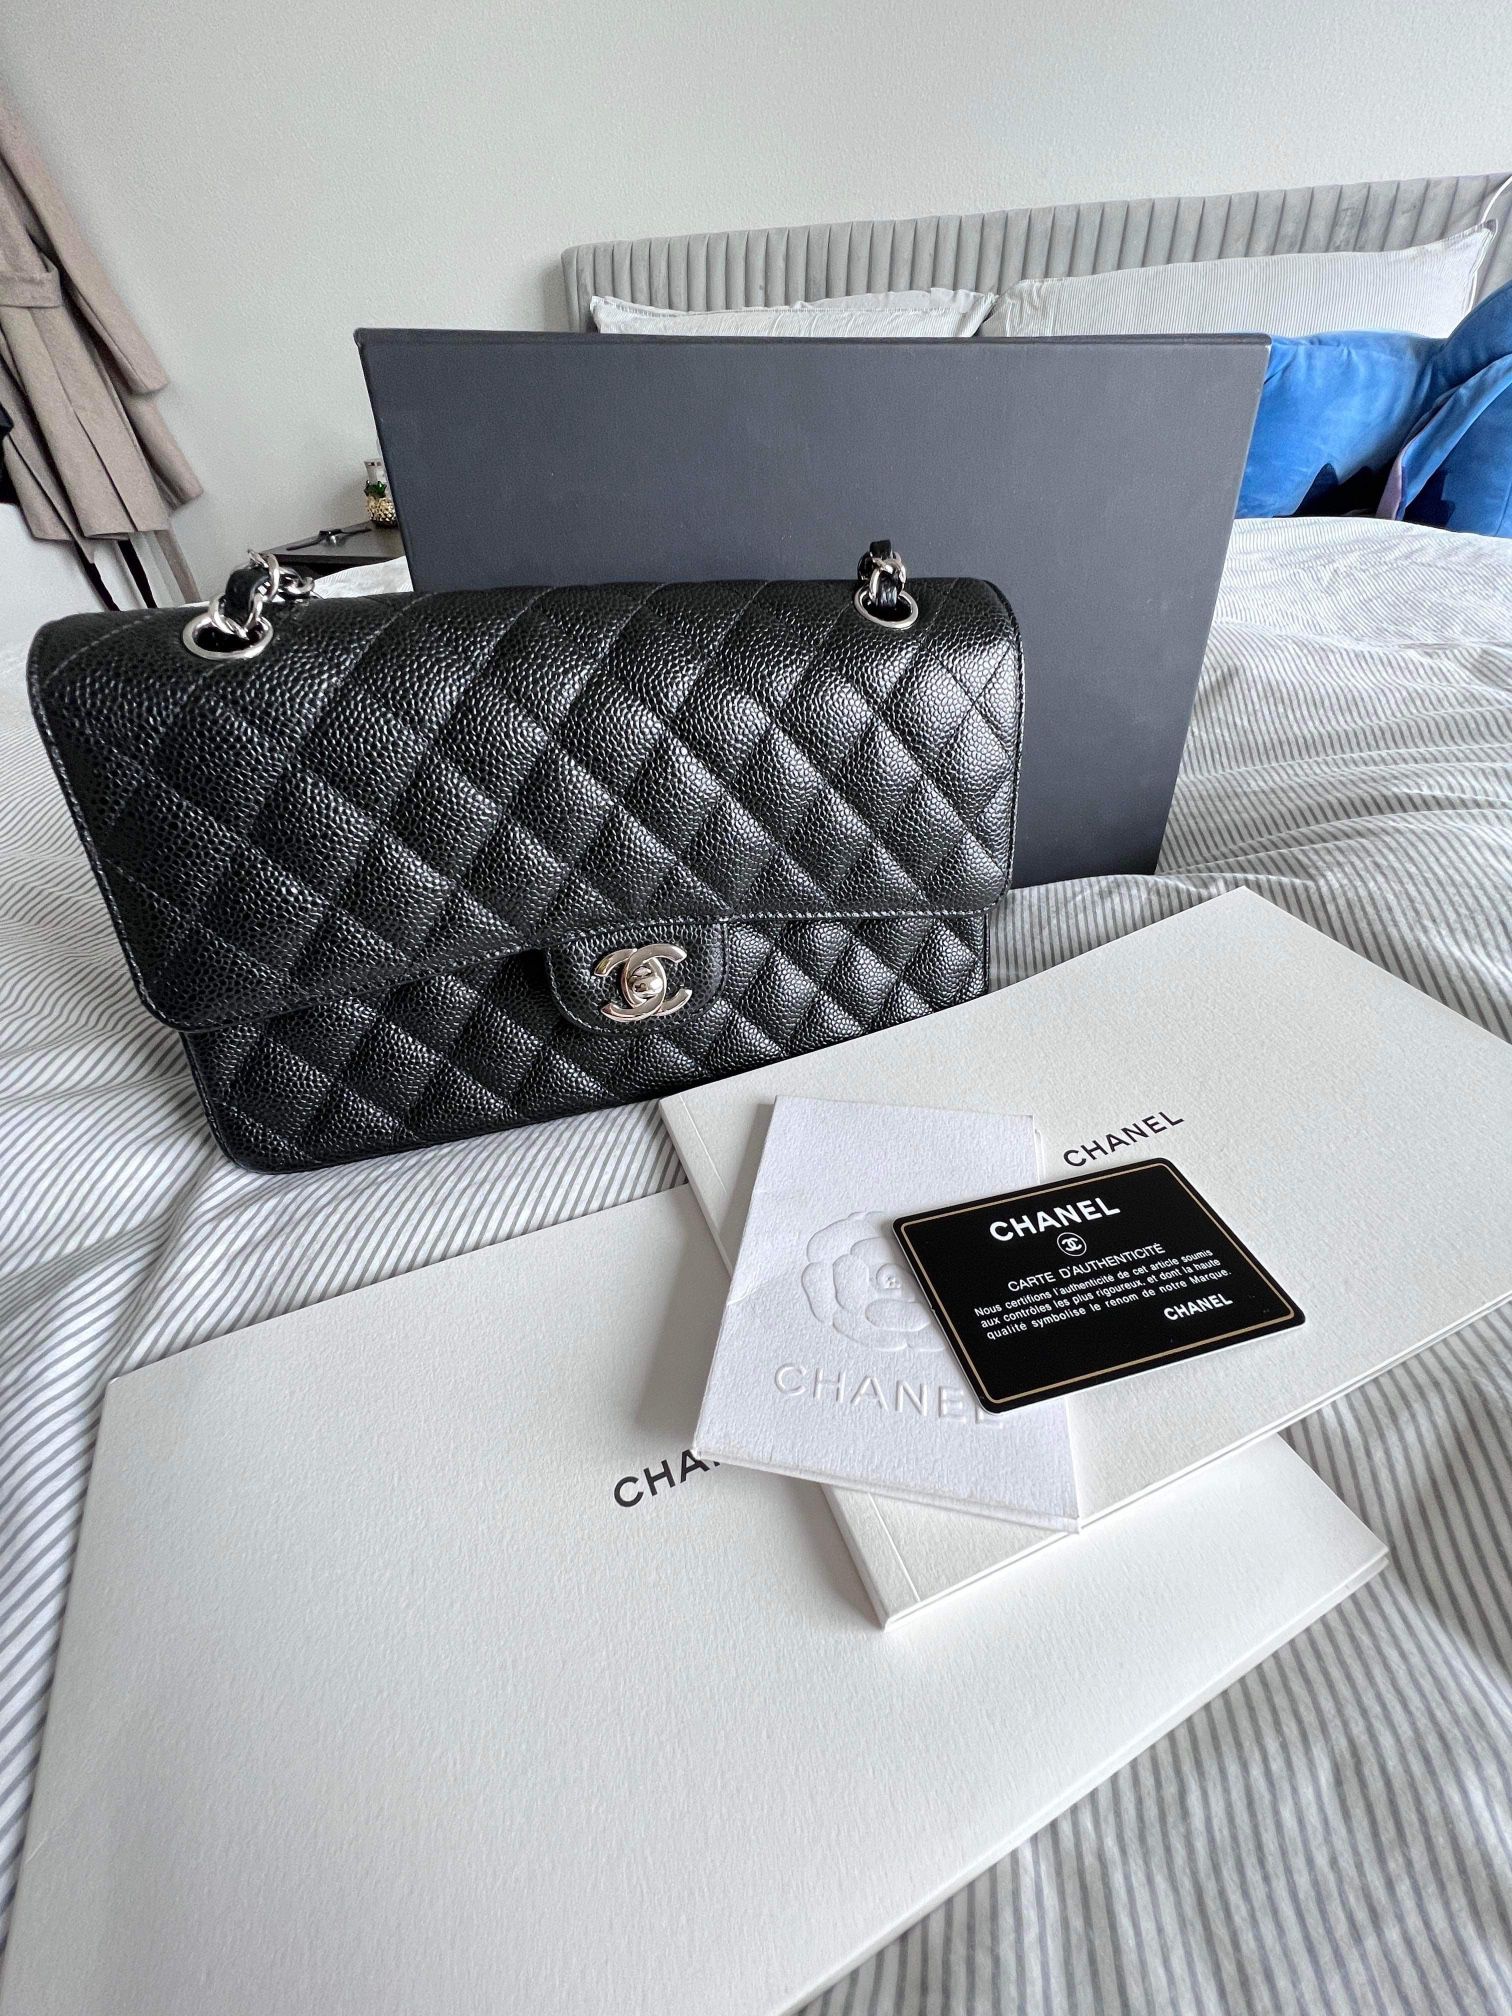 Chanel flap black caviar silver hardware for in Washington, DC - OfferUp